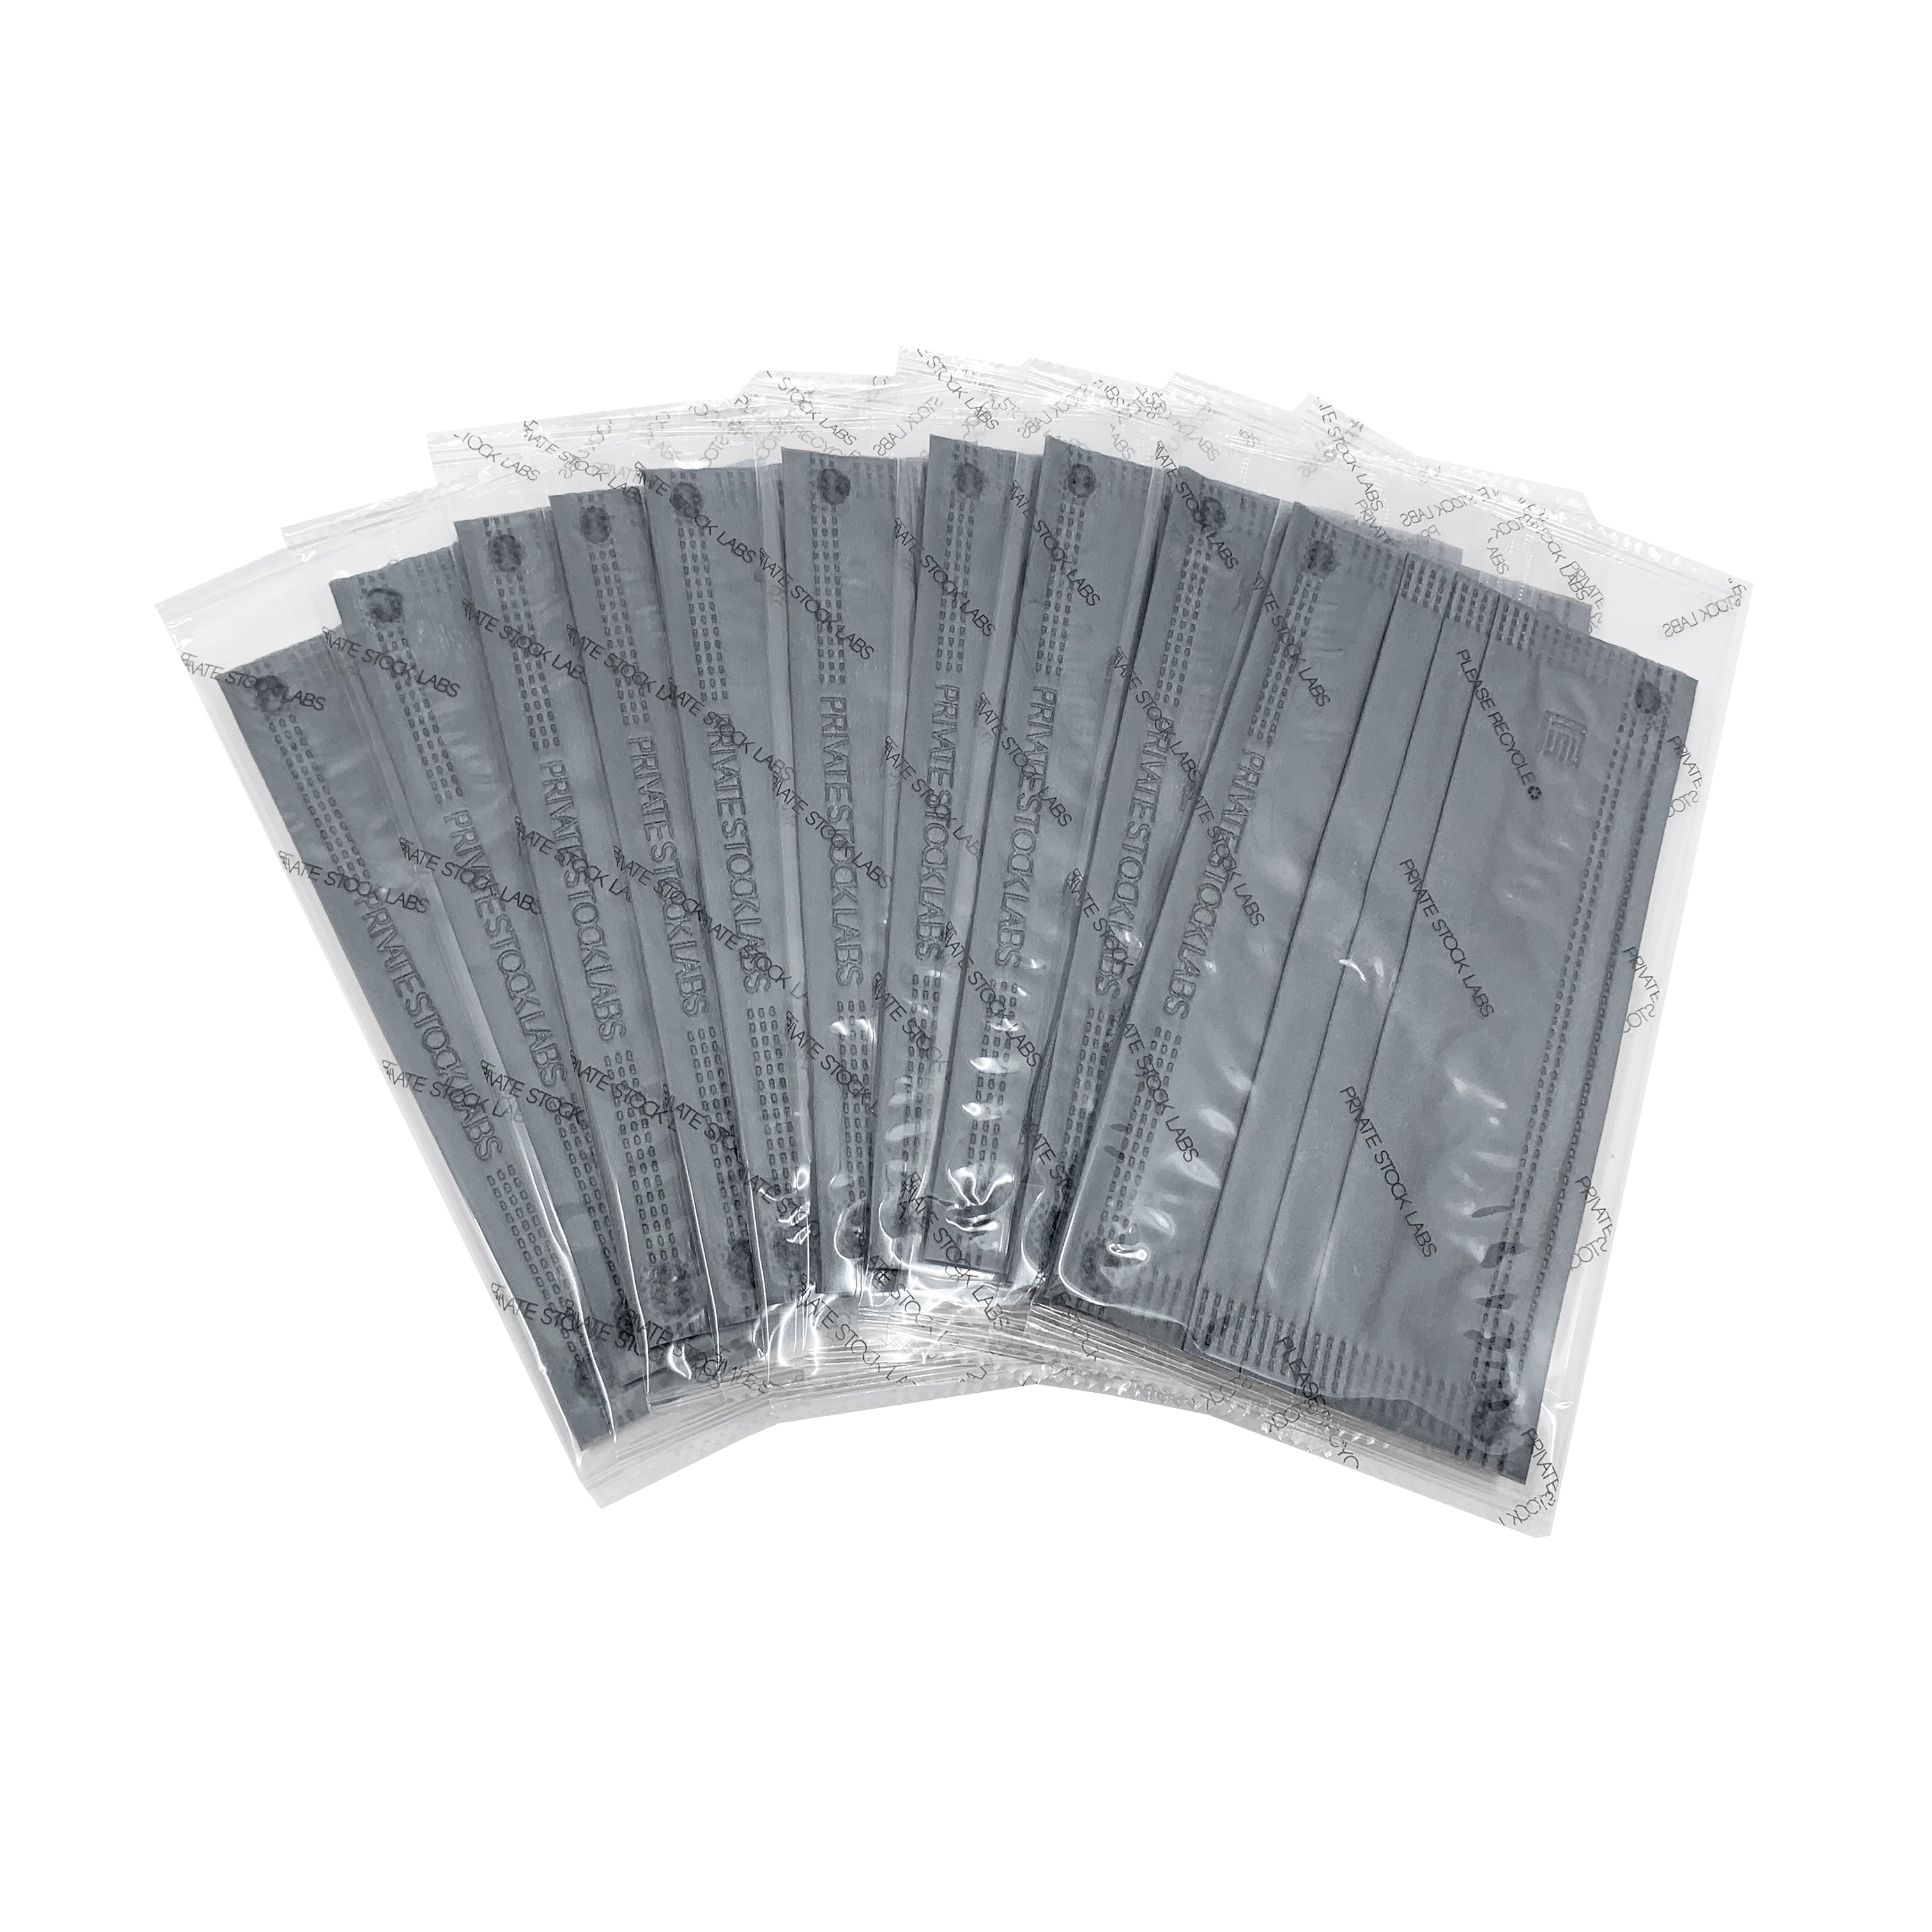 4-Ply Protective Mask - Neutral Series - Grey (Pack of 10)